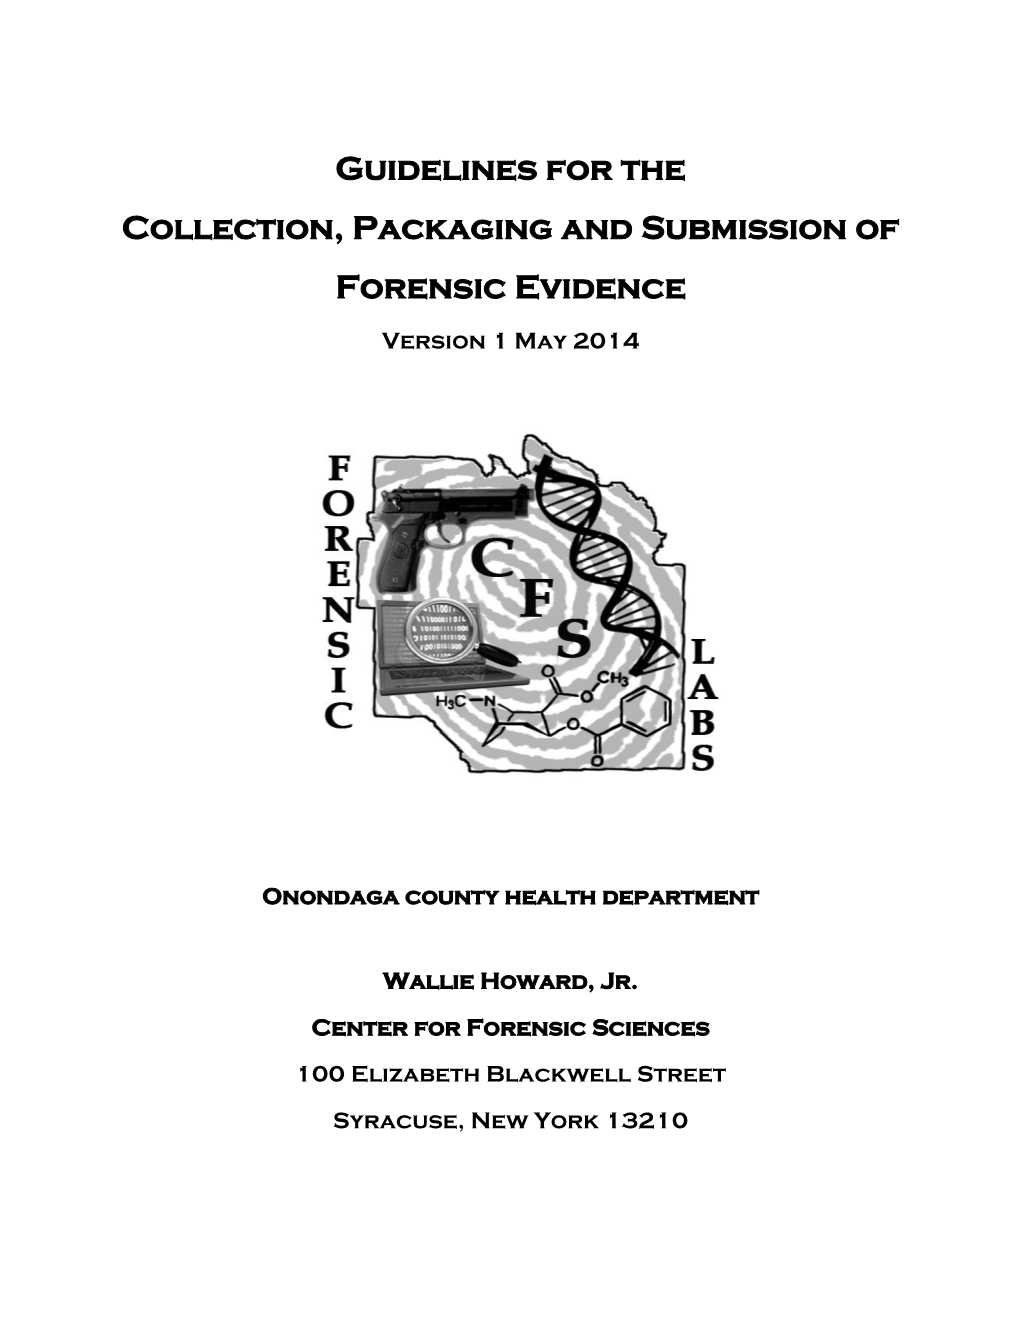 Guidelines for the Collection, Packaging and Submission of Forensic Evidence